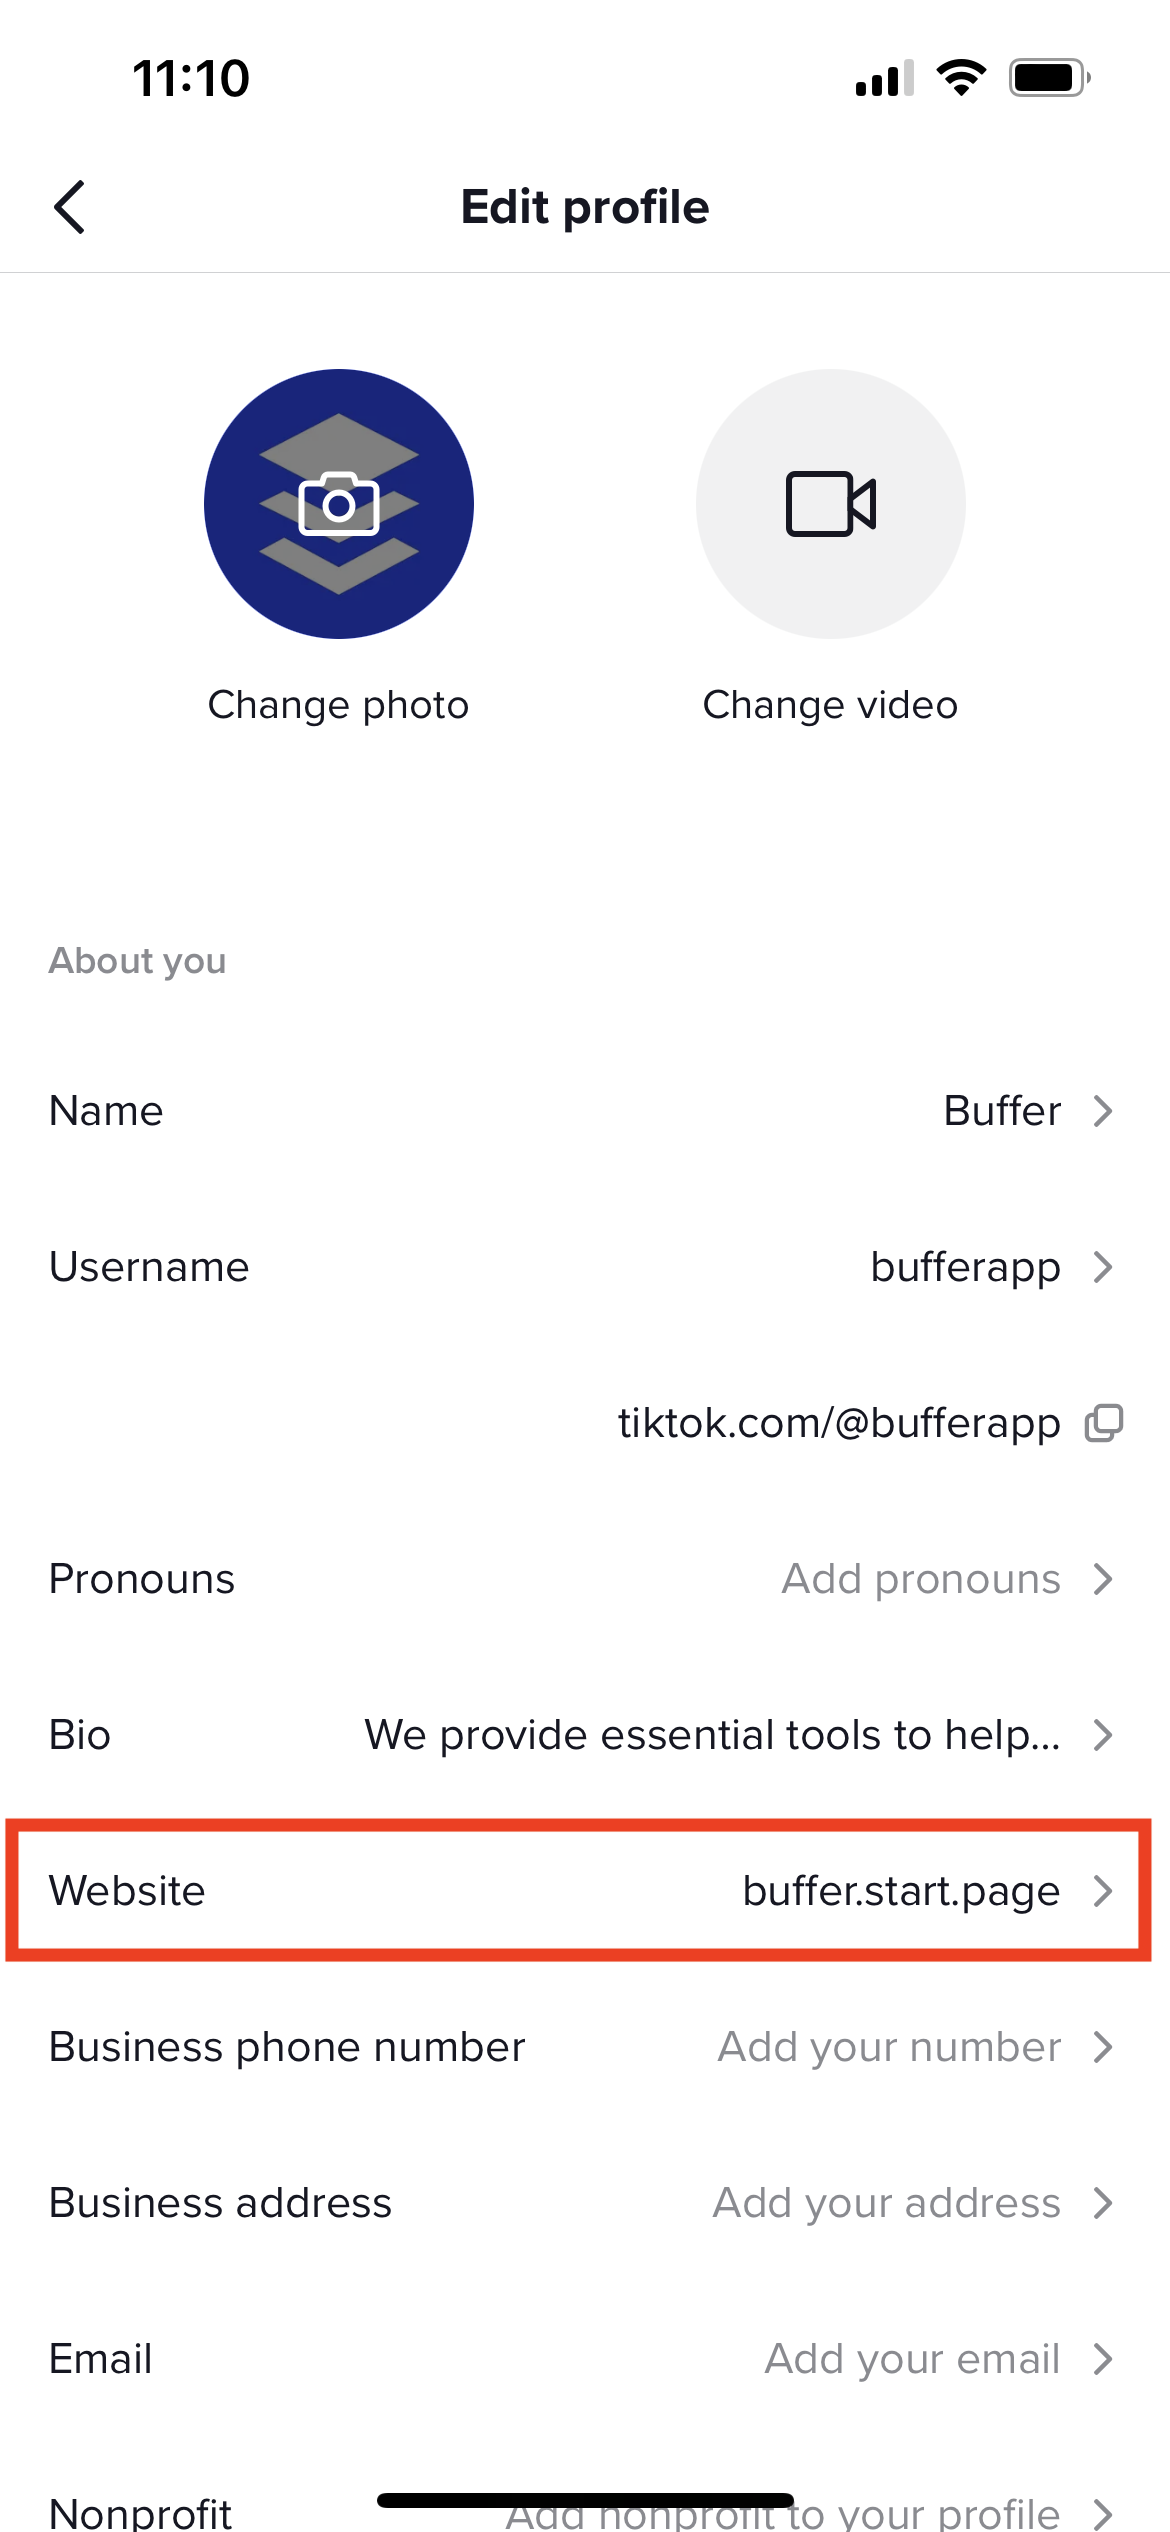 IMG 0604 - TikTok Ban: What It Means for Buffer and How To Prepare